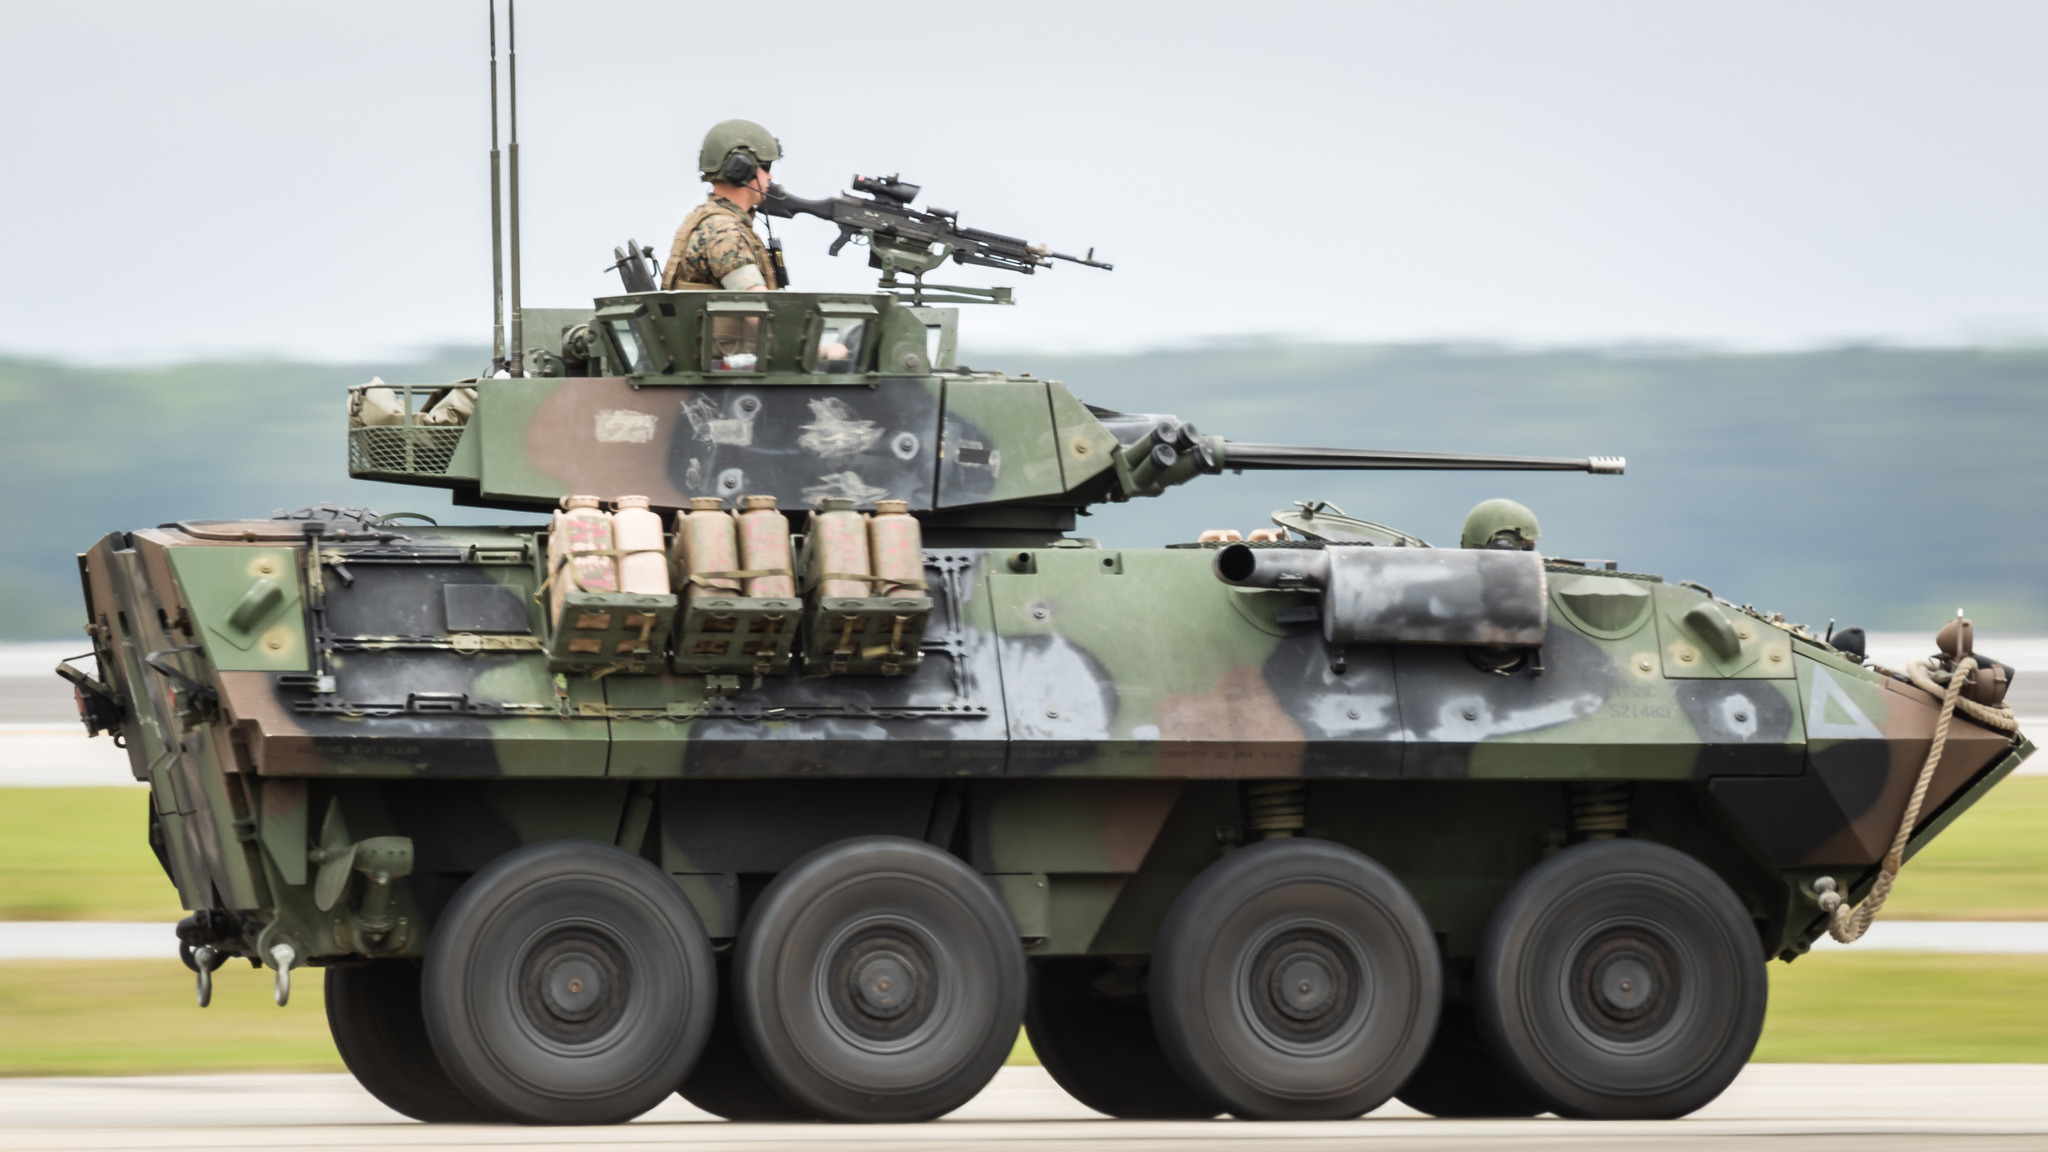 military, armored personnel carrier, soldier, vehicle, armored fighting vehicle